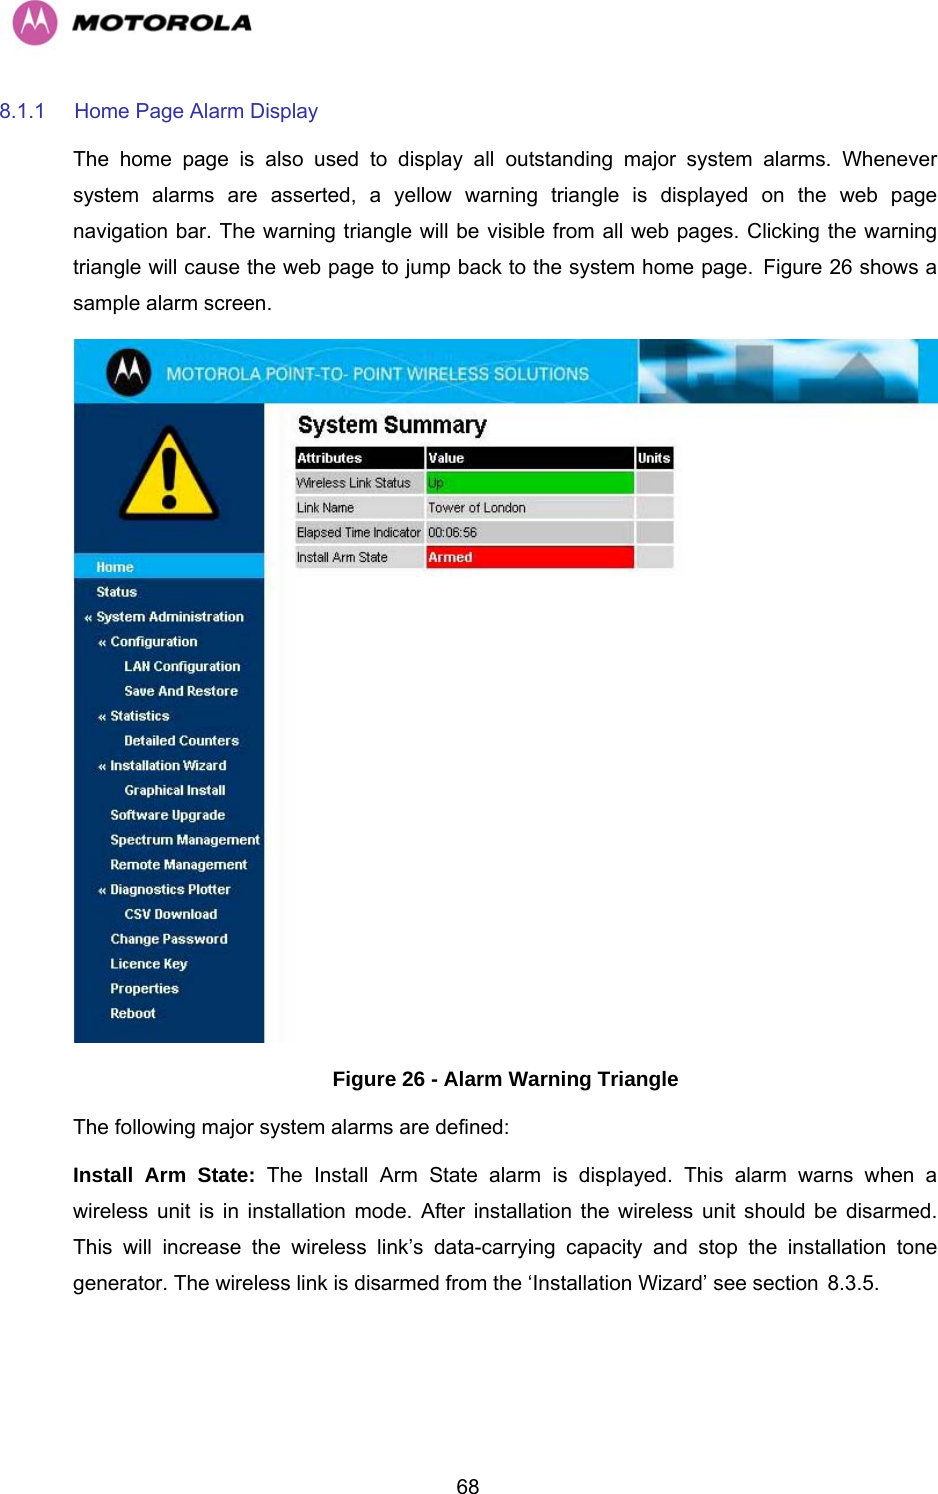   688.1.1  Home Page Alarm Display The home page is also used to display all outstanding major system alarms. Whenever system alarms are asserted, a yellow warning triangle is displayed on the web page navigation bar. The warning triangle will be visible from all web pages. Clicking the warning triangle will cause the web page to jump back to the system home page. HFigure 26 shows a sample alarm screen.  Figure 26 - Alarm Warning Triangle The following major system alarms are defined:  Install Arm State: The Install Arm State alarm is displayed. This alarm warns when a wireless unit is in installation mode. After installation the wireless unit should be disarmed. This will increase the wireless link’s data-carrying capacity and stop the installation tone generator. The wireless link is disarmed from the ‘Installation Wizard’ see section H8.3.5. 